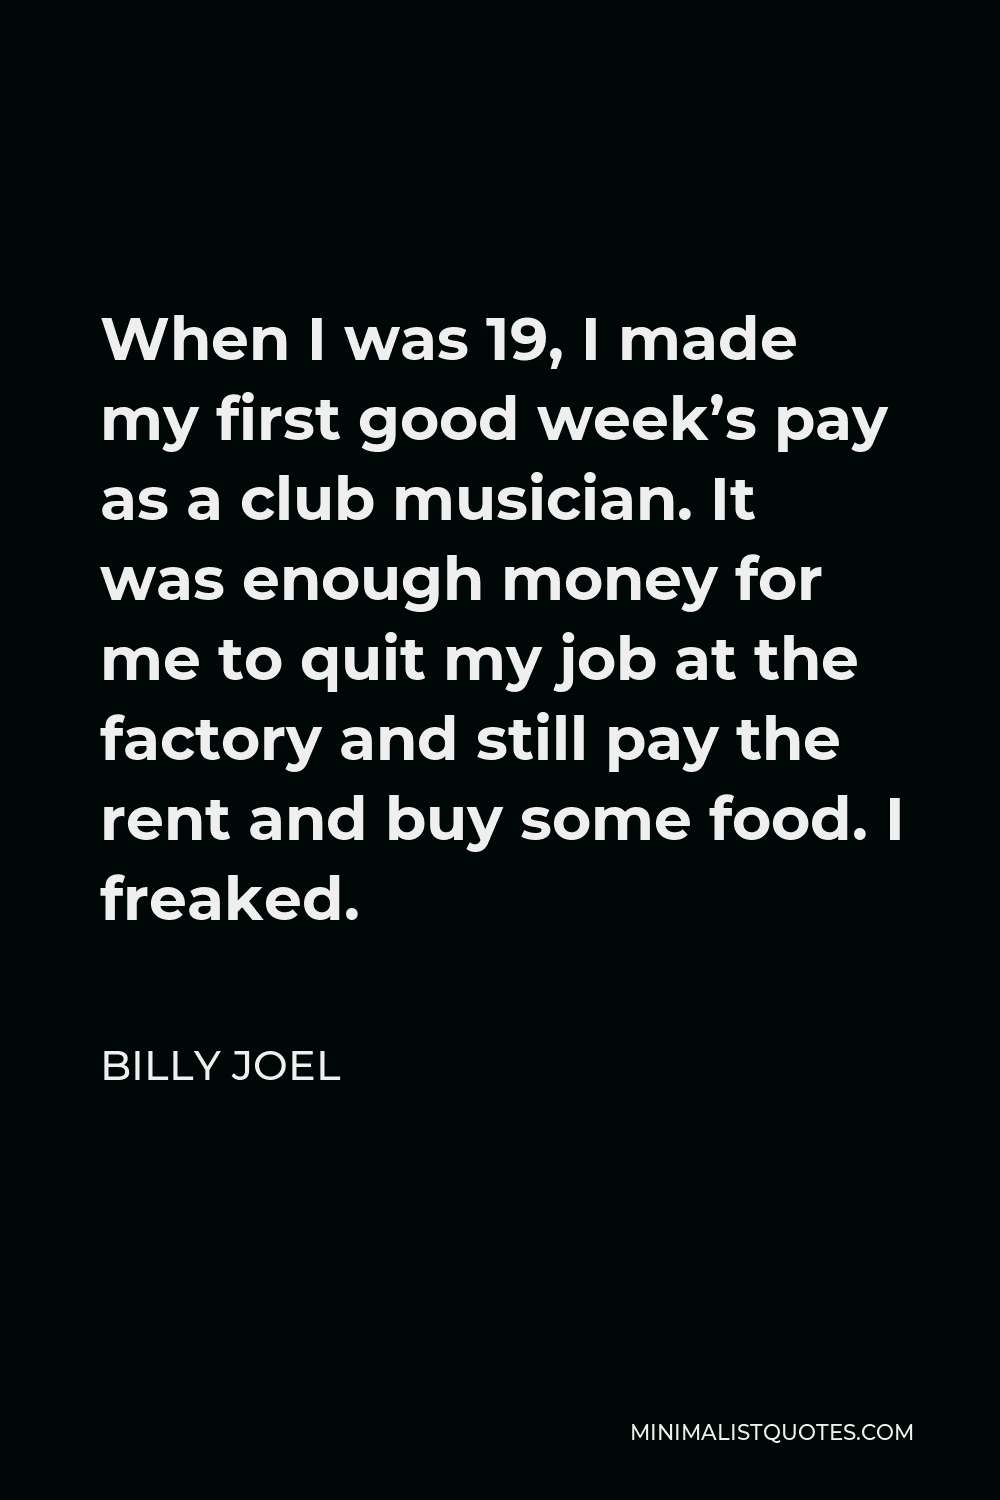 Billy Joel Quote - When I was 19, I made my first good week’s pay as a club musician. It was enough money for me to quit my job at the factory and still pay the rent and buy some food. I freaked.